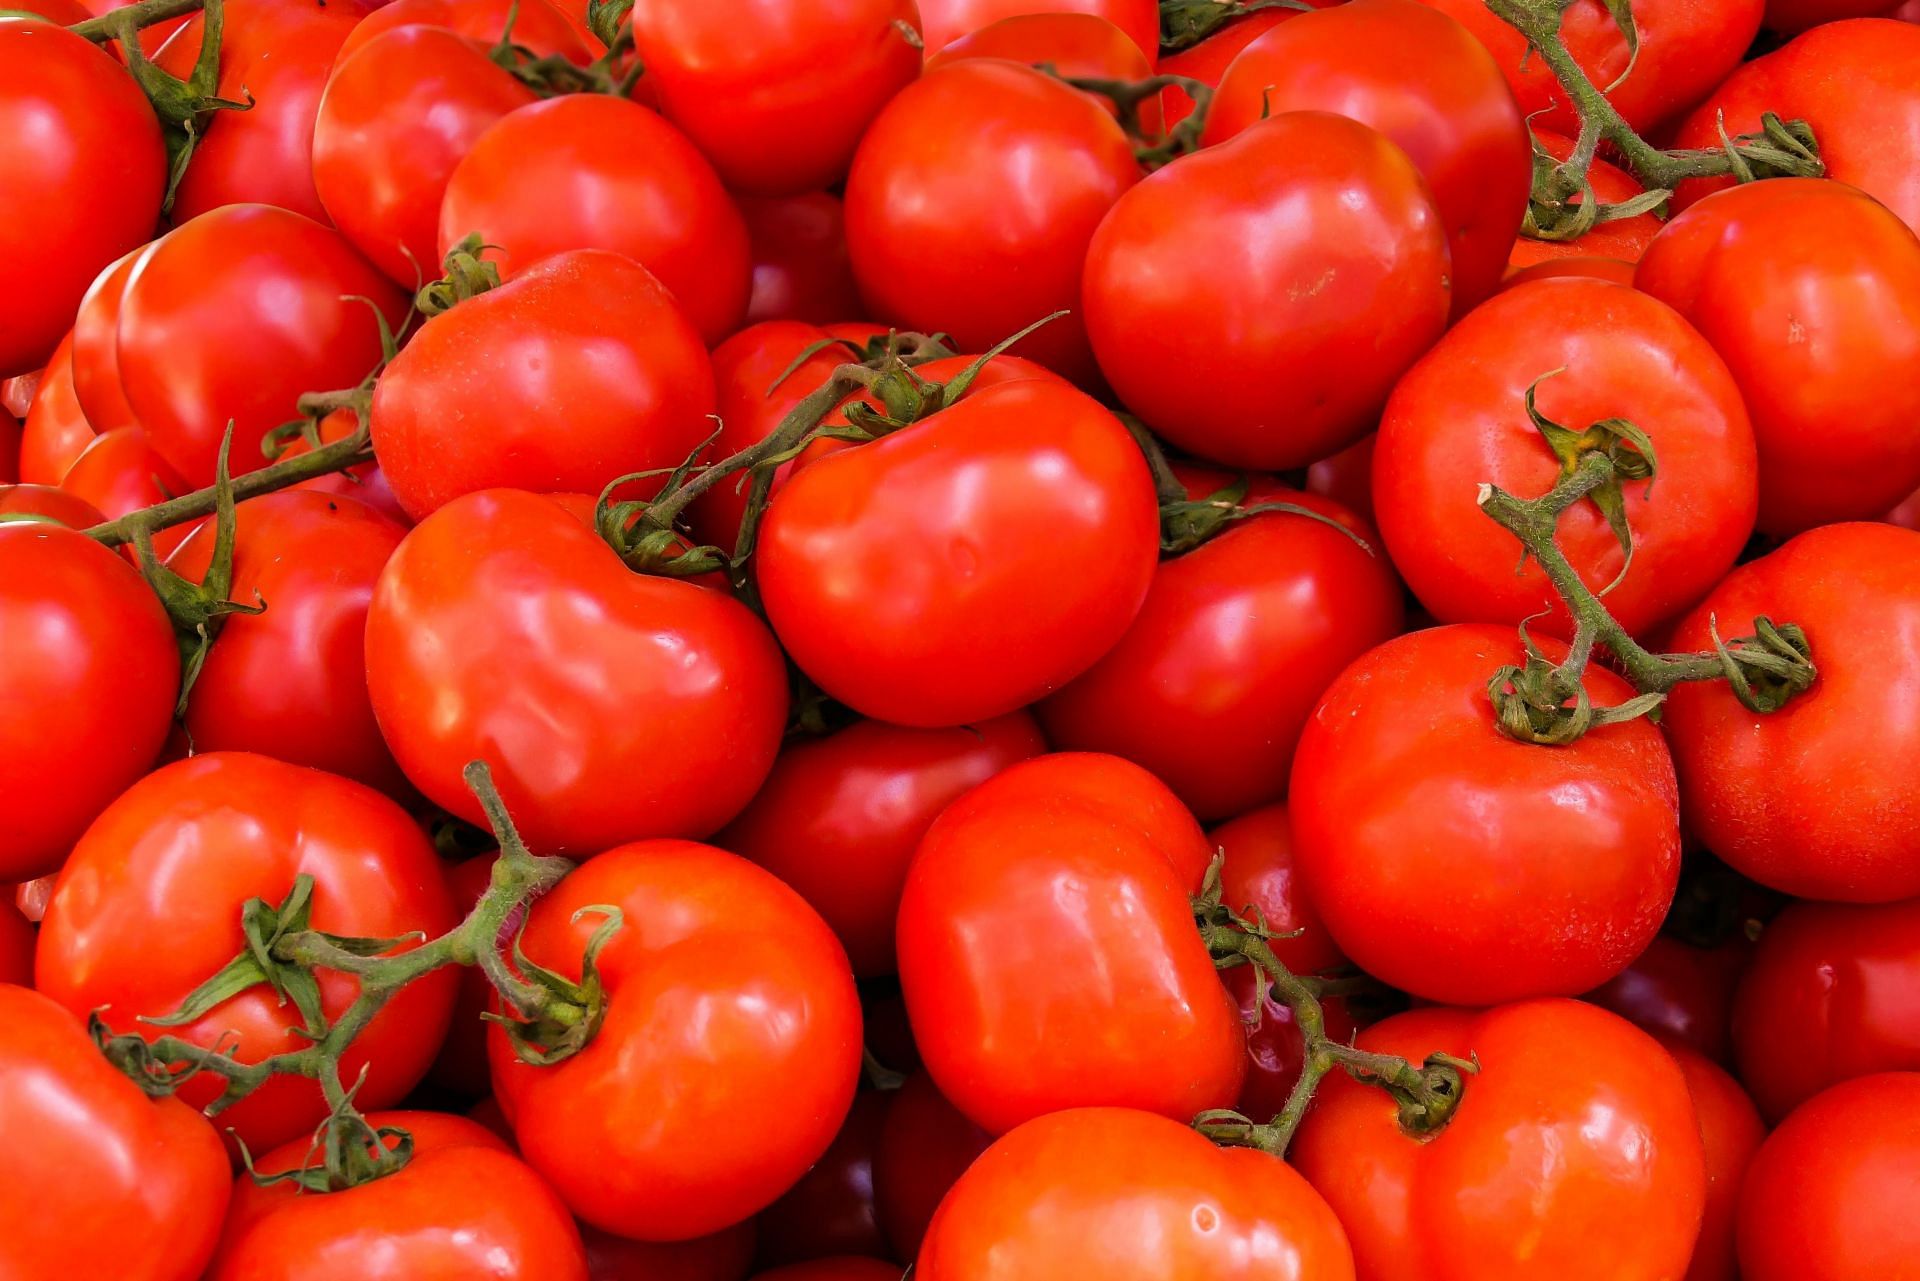 Tomatoes as foods that help elasticity in skin (image sourced via Pexels / Photo by Pixabay)